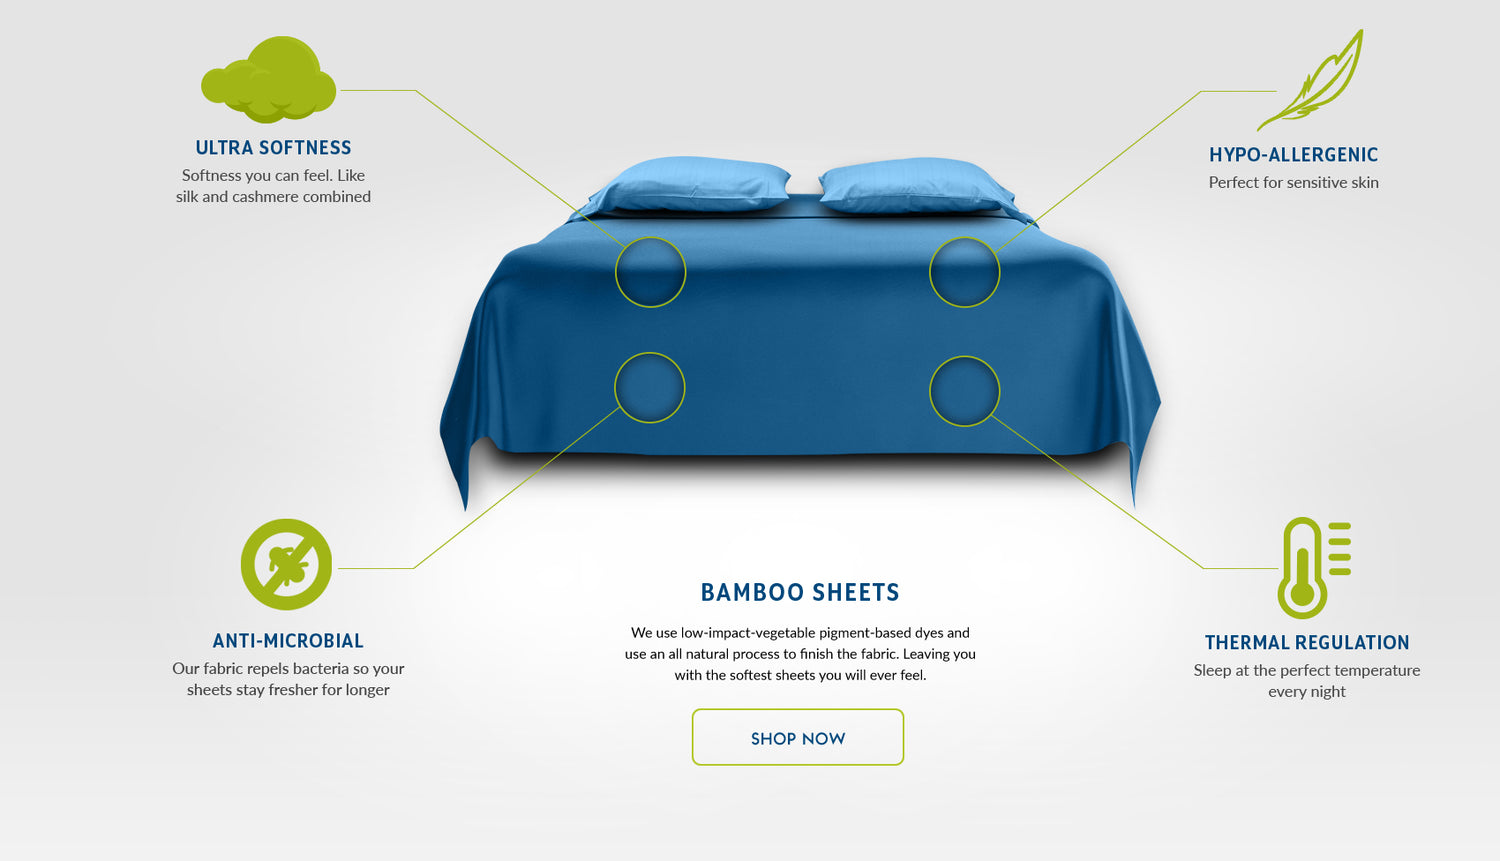 Start sleeping better with bamboo sheets and for the bathroom try bamboo towels for the best dry.